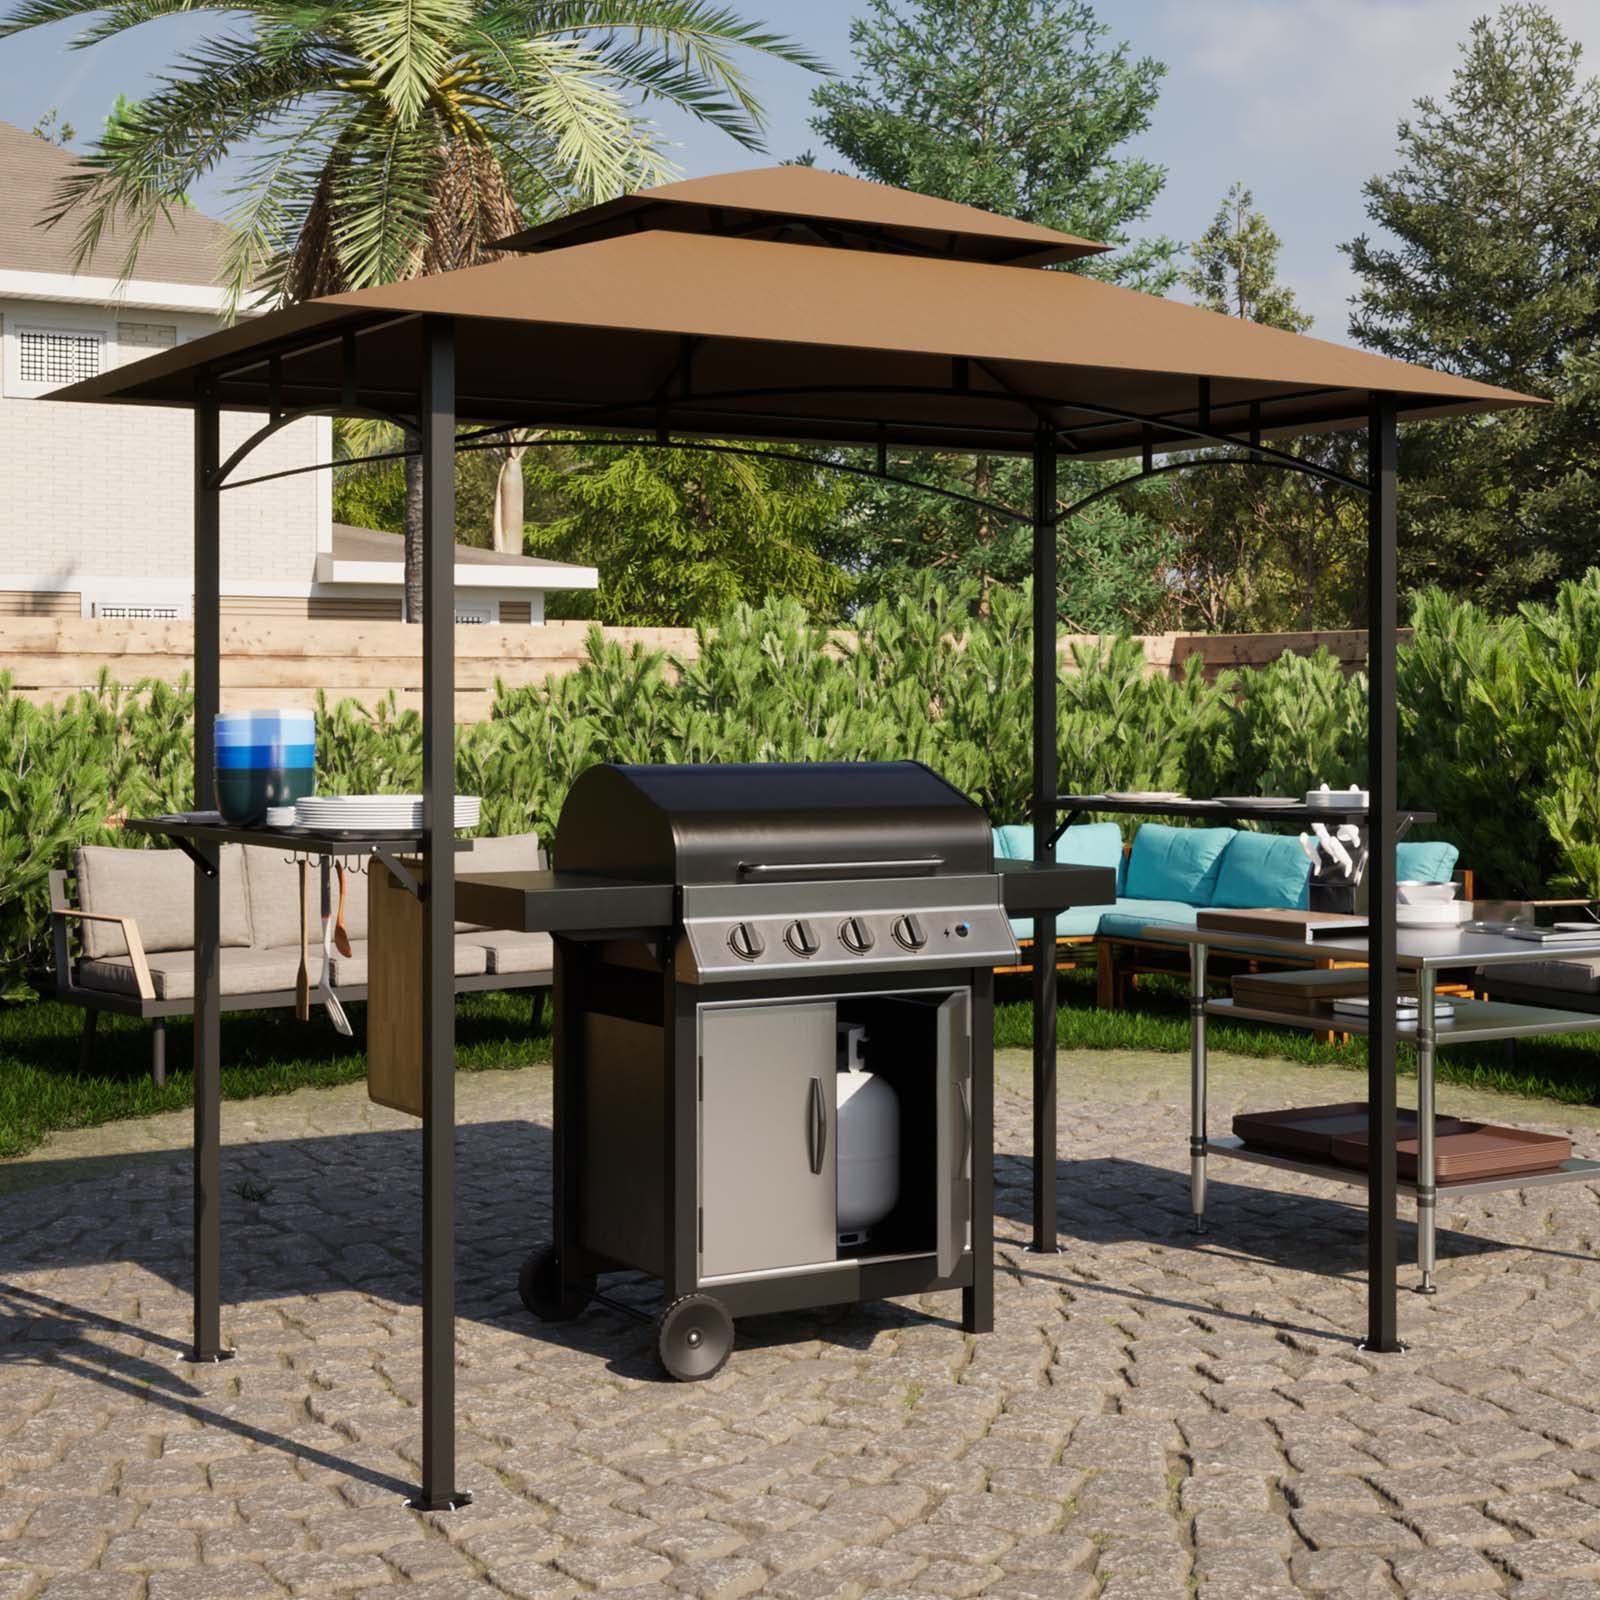 8x5 Ft Grill Gazebo, Double Tiered Outdoor BBQ Gazebo with 2 Side Shelves, 5 Hooks, Bottle Opener, Barbecue Grill Gazebo Shelter for Patio, Garden, Beach, Backyard and Picnic (Khaki)